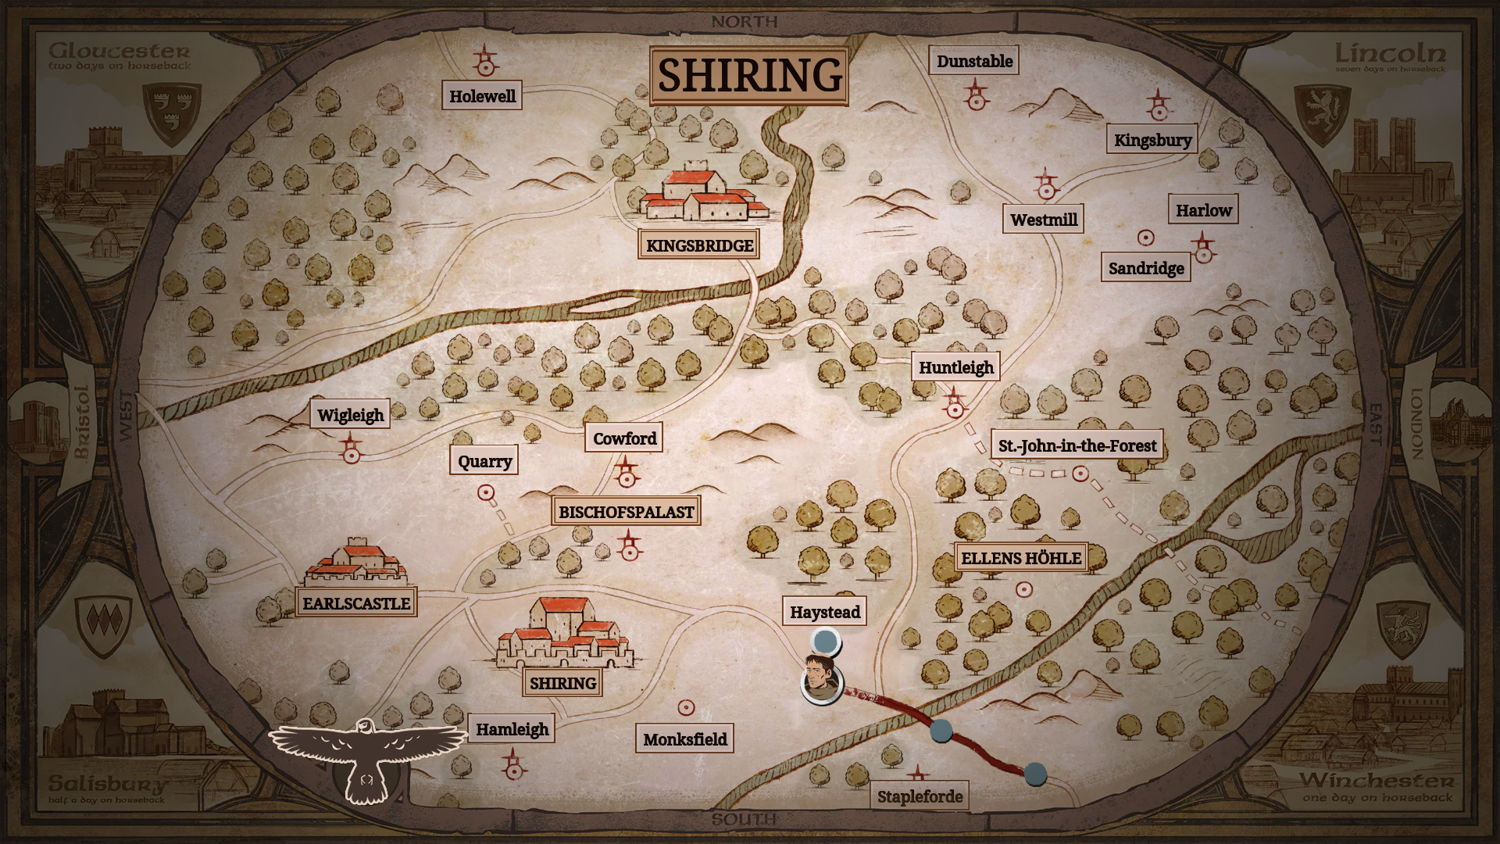 Philp's travel and an overview of Shiring